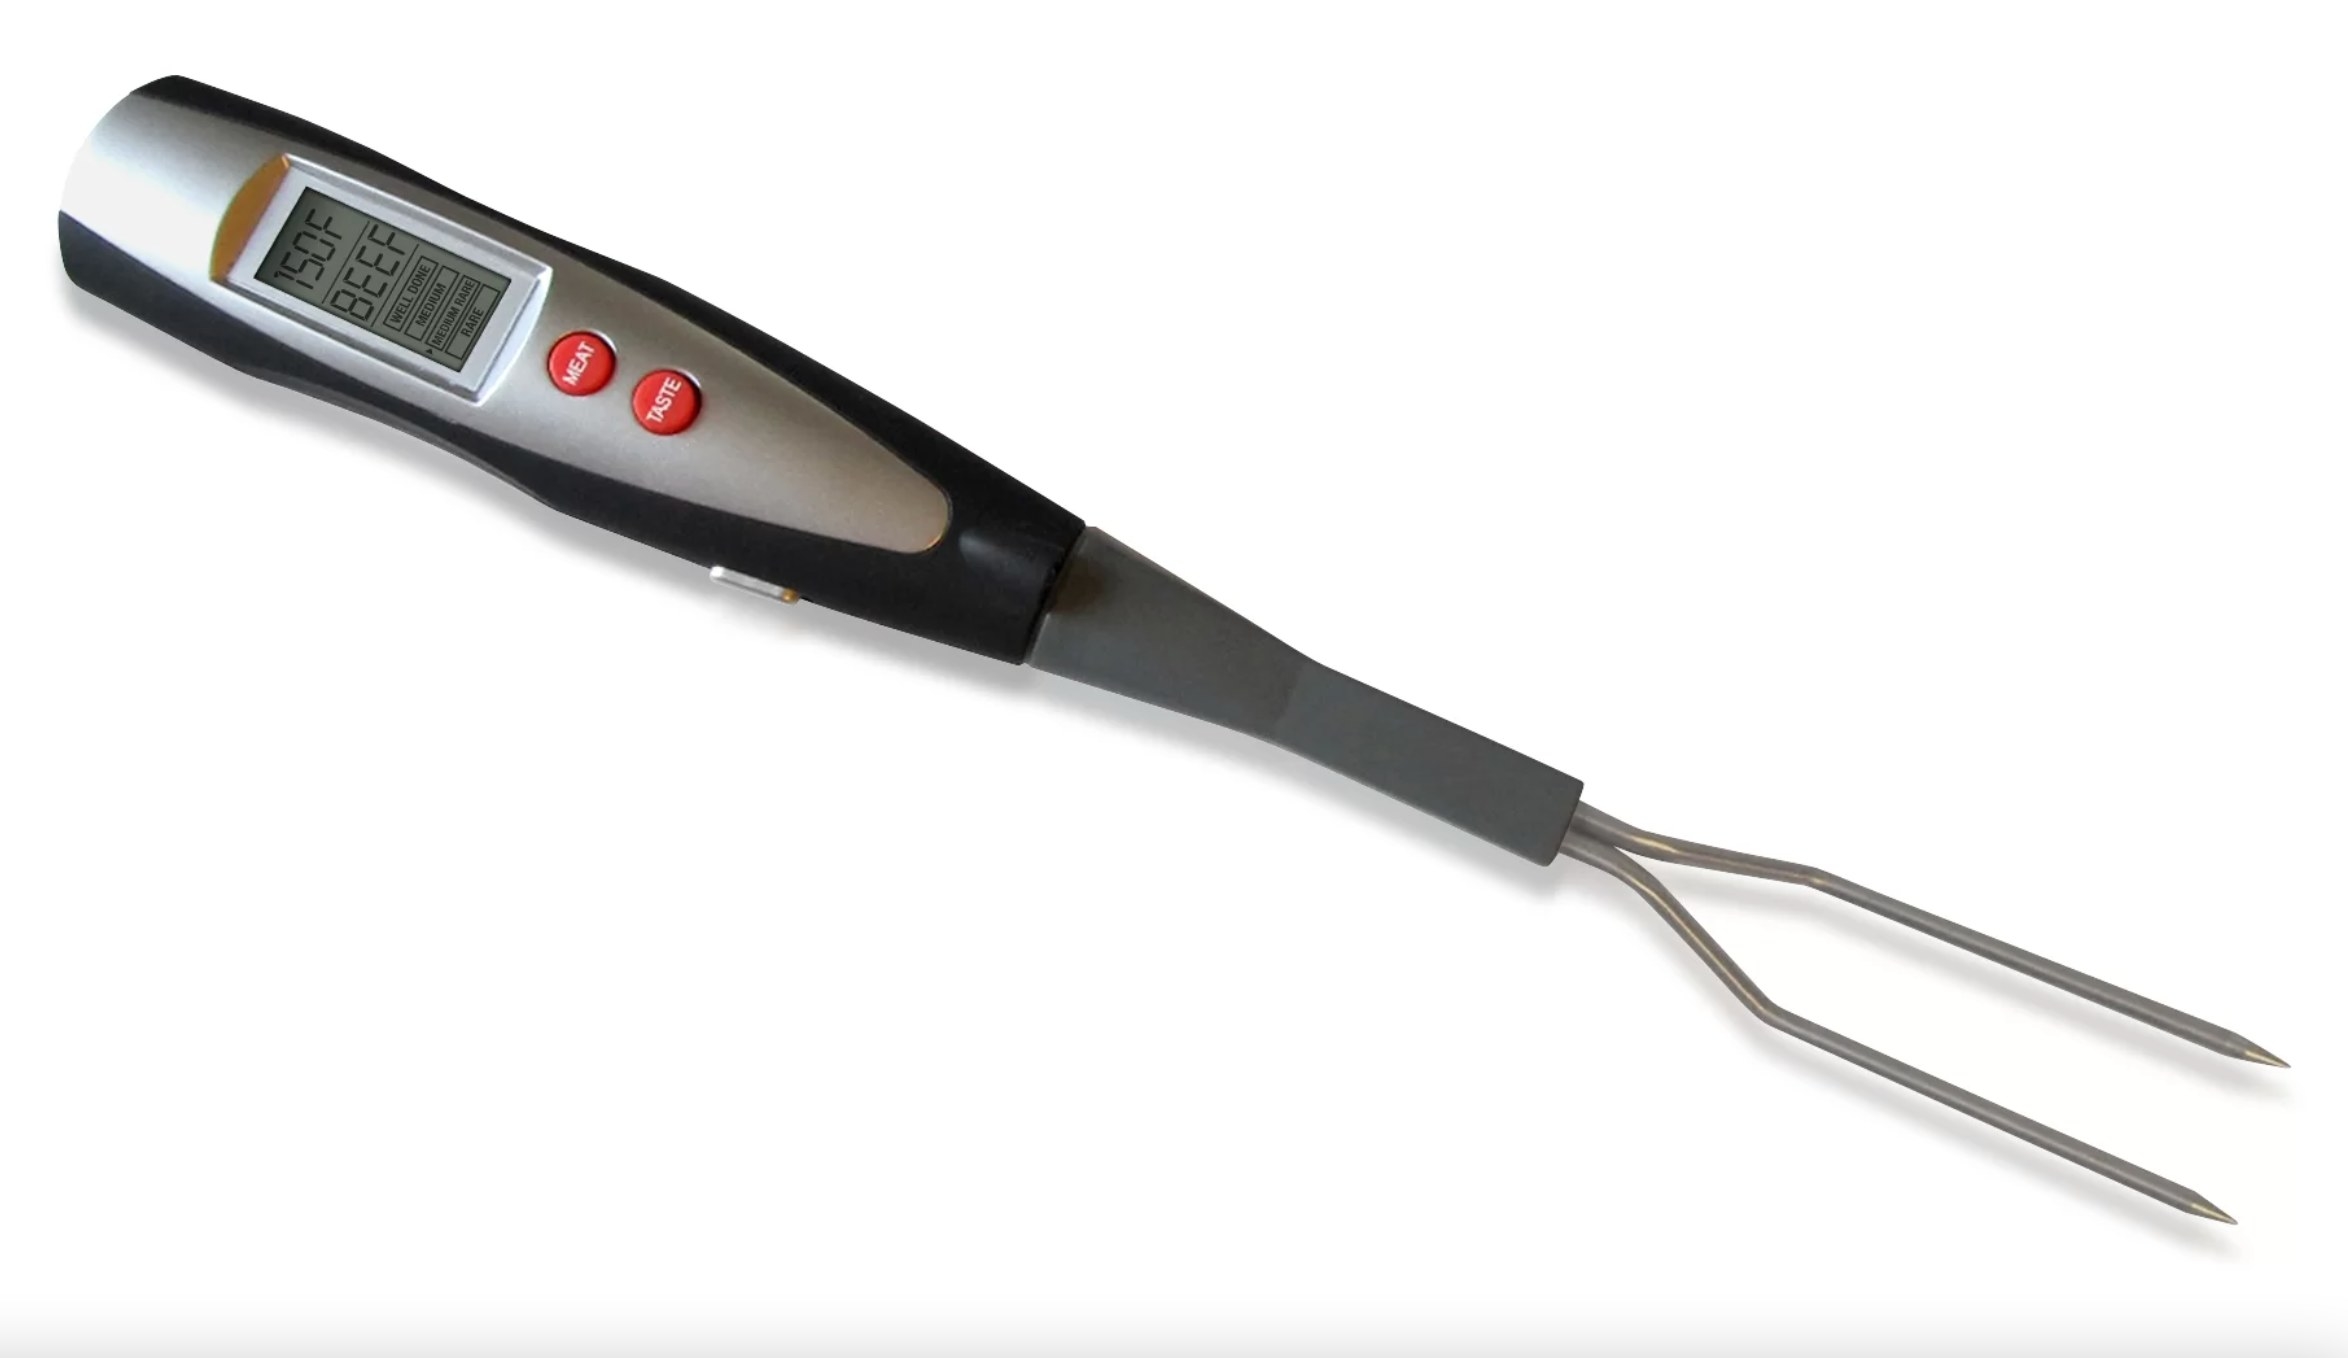 the silver and black fork with red buttons and a grey screen